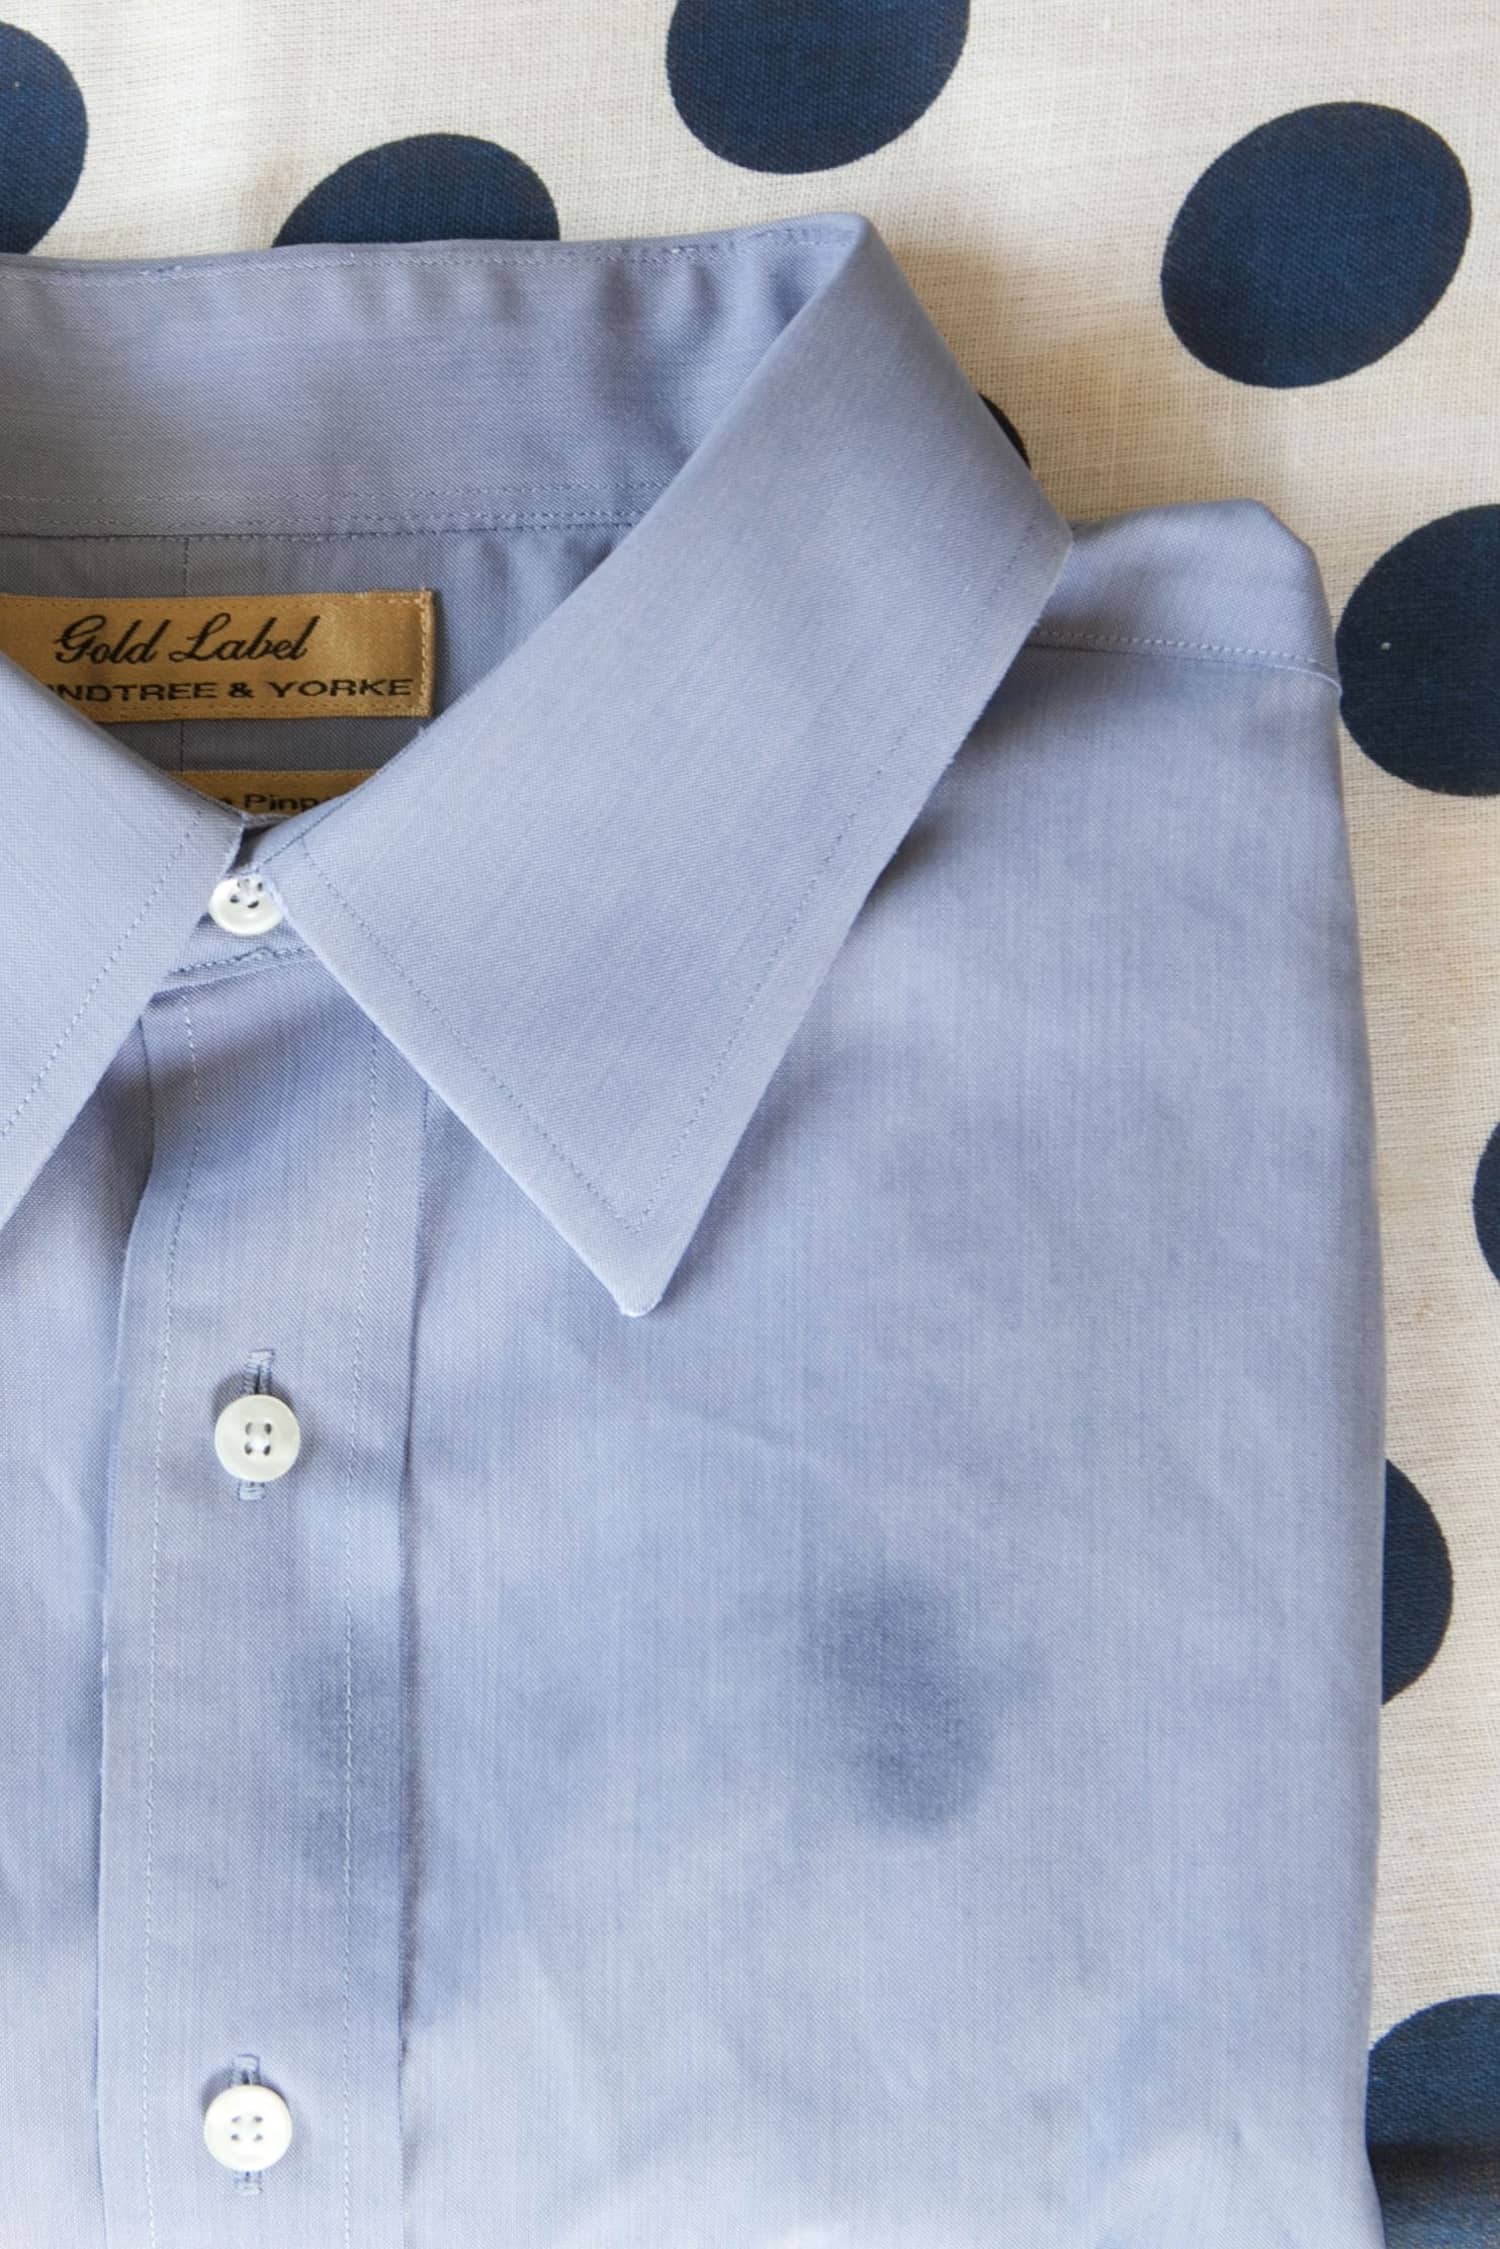 How To Remove Grease Stains | Kitchn